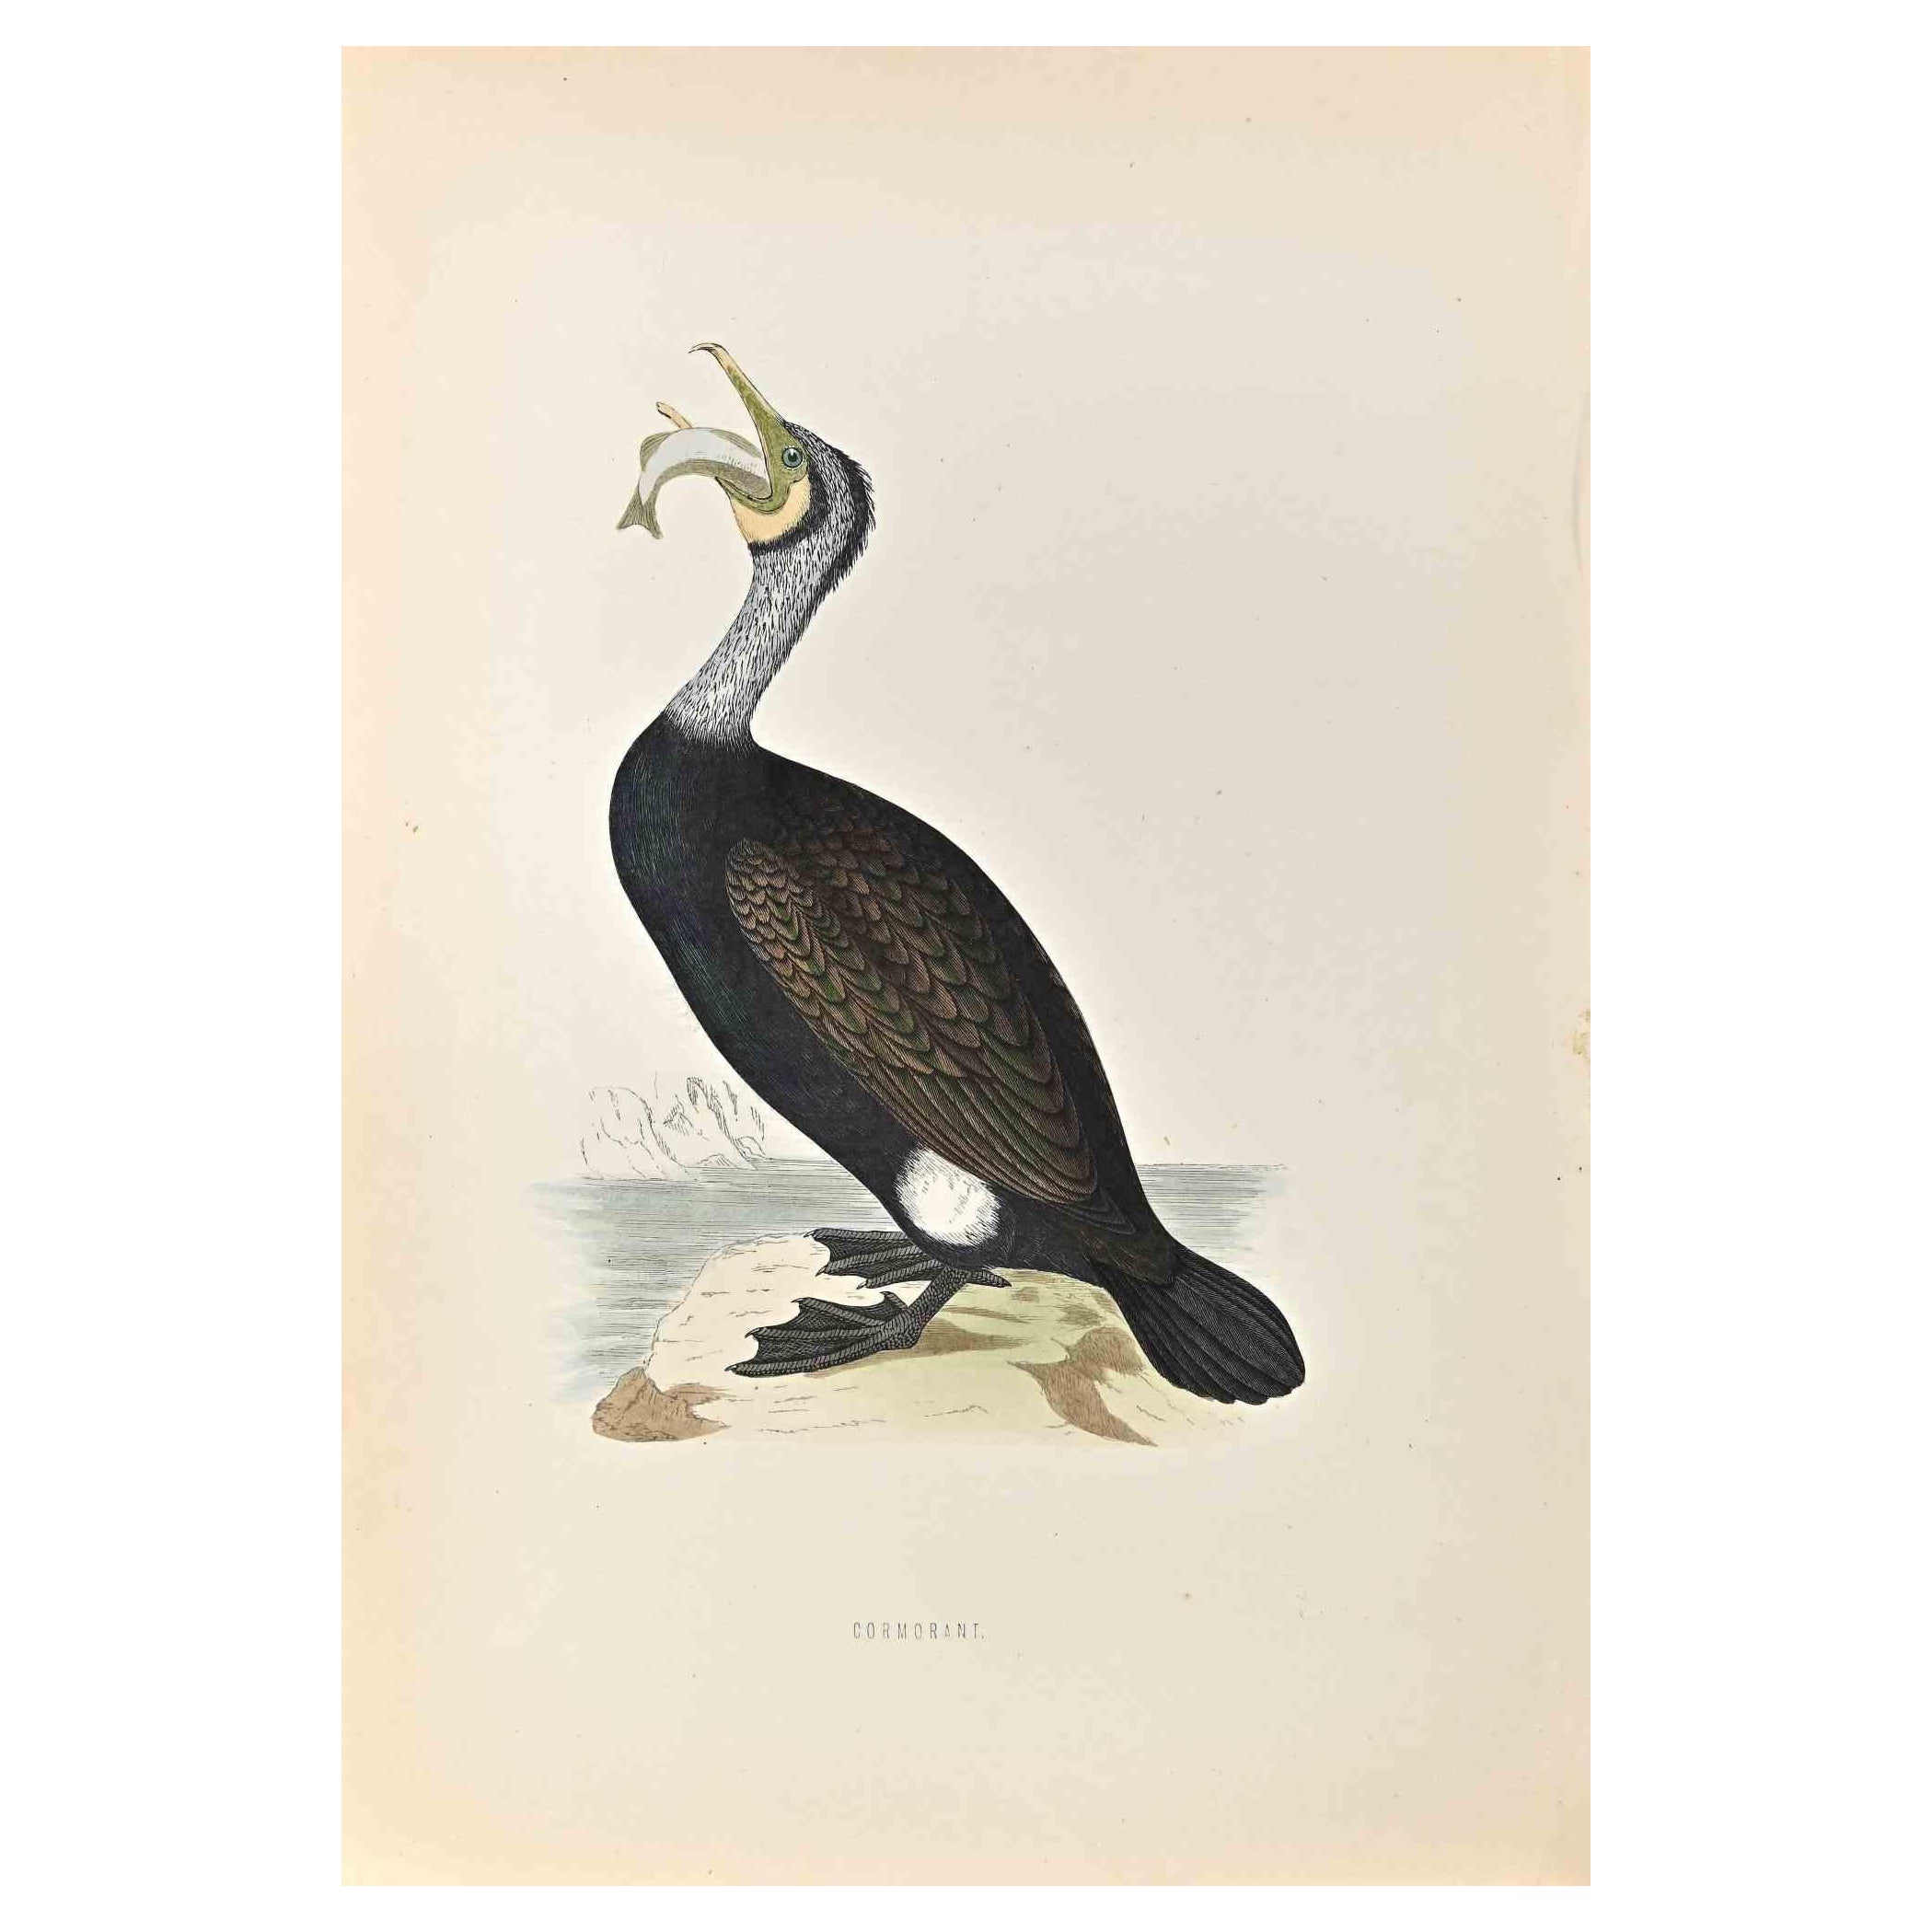 Cormorant is a modern artwork realized in 1870 by the British artist Alexander Francis Lydon (1836-1917) . 

Woodcut print, hand colored, published by London, Bell & Sons, 1870.  Name of the bird printed in plate. This work is part of a print suite